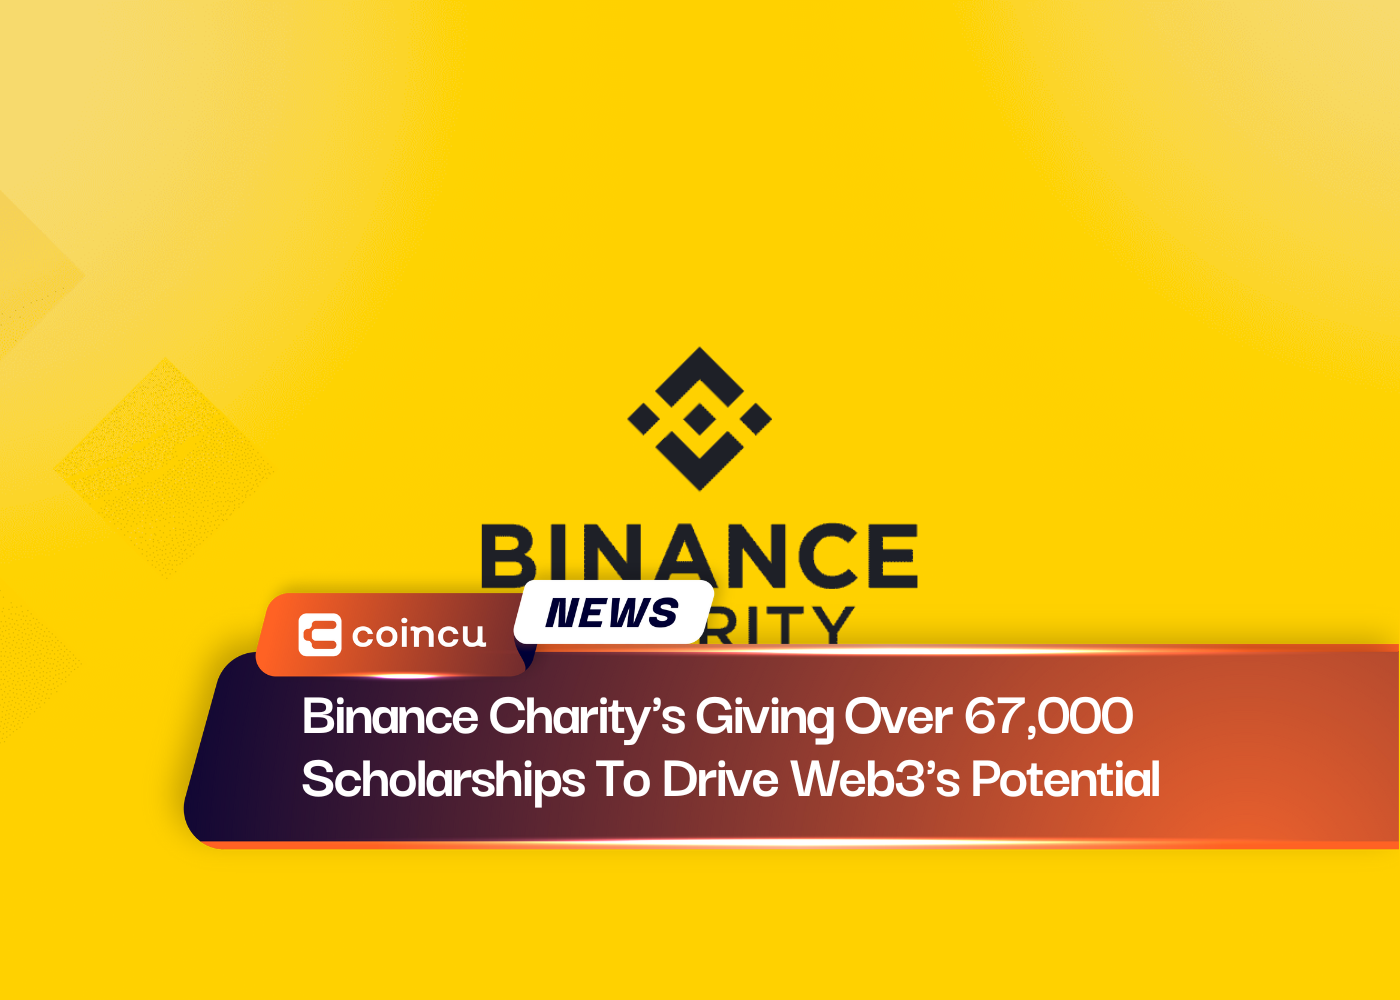 Binance Charity's Giving Over 67,000 Scholarships To Drive Web3's Potential